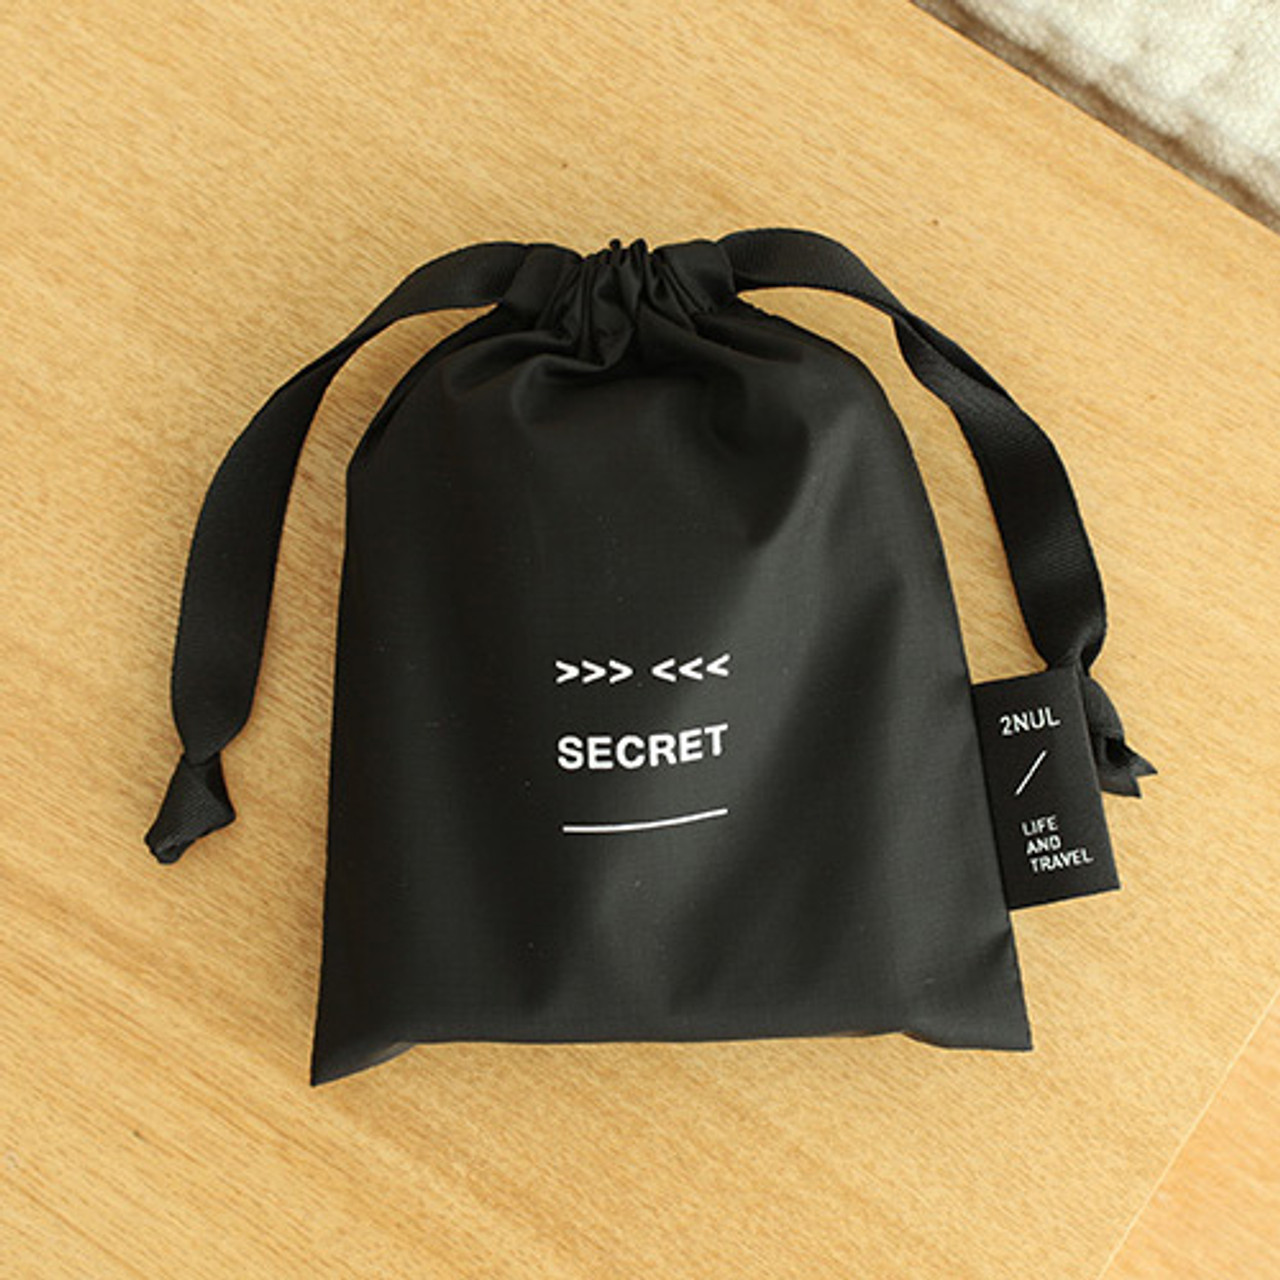 2NUL Life and travel secret drawstring small pouch ver.2 - fallindesign